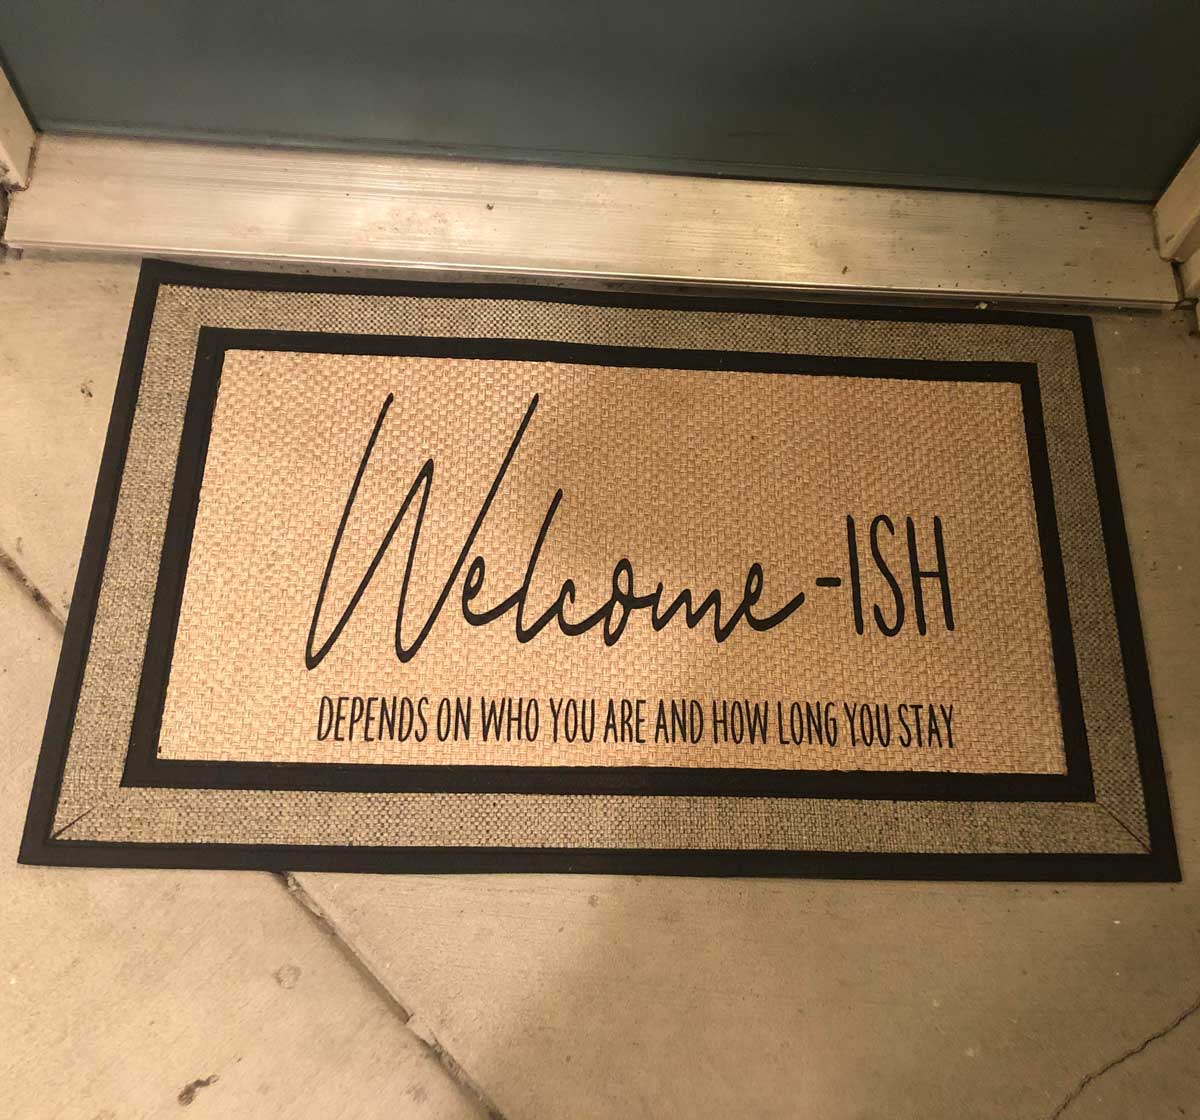 My new doormat sets expectations correctly